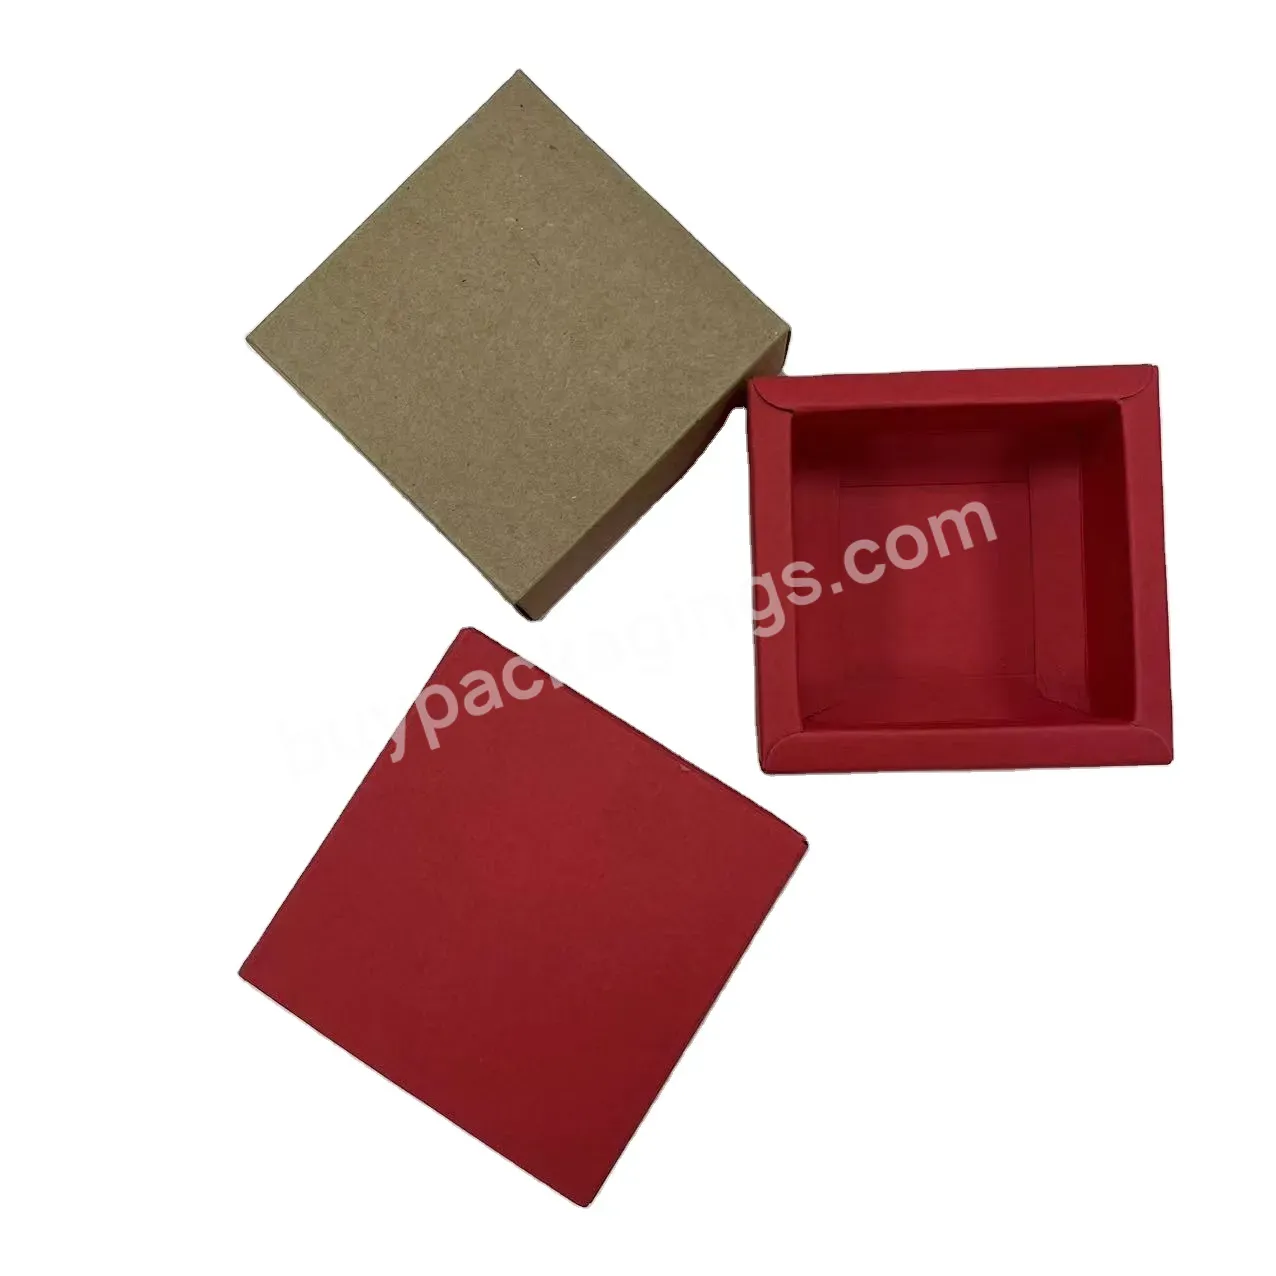 Printed Cardboard Box Mailing Apparel Box Corrugated Custom Shipping Boxes With Logo Packaging Manufacturer Large Color